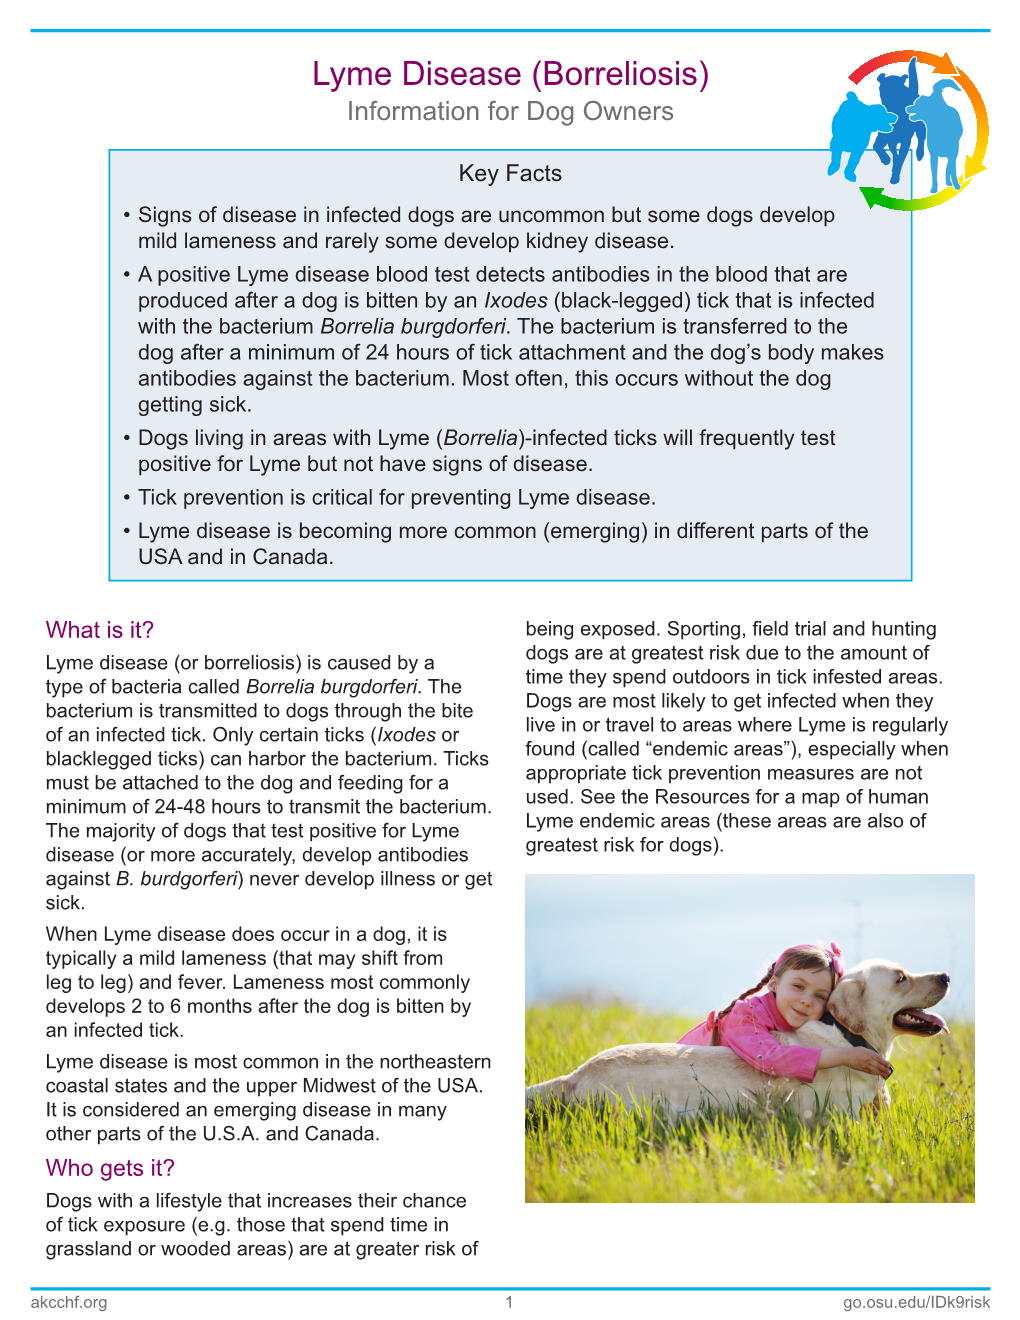 Lyme Disease (Borreliosis) Information for Dog Owners